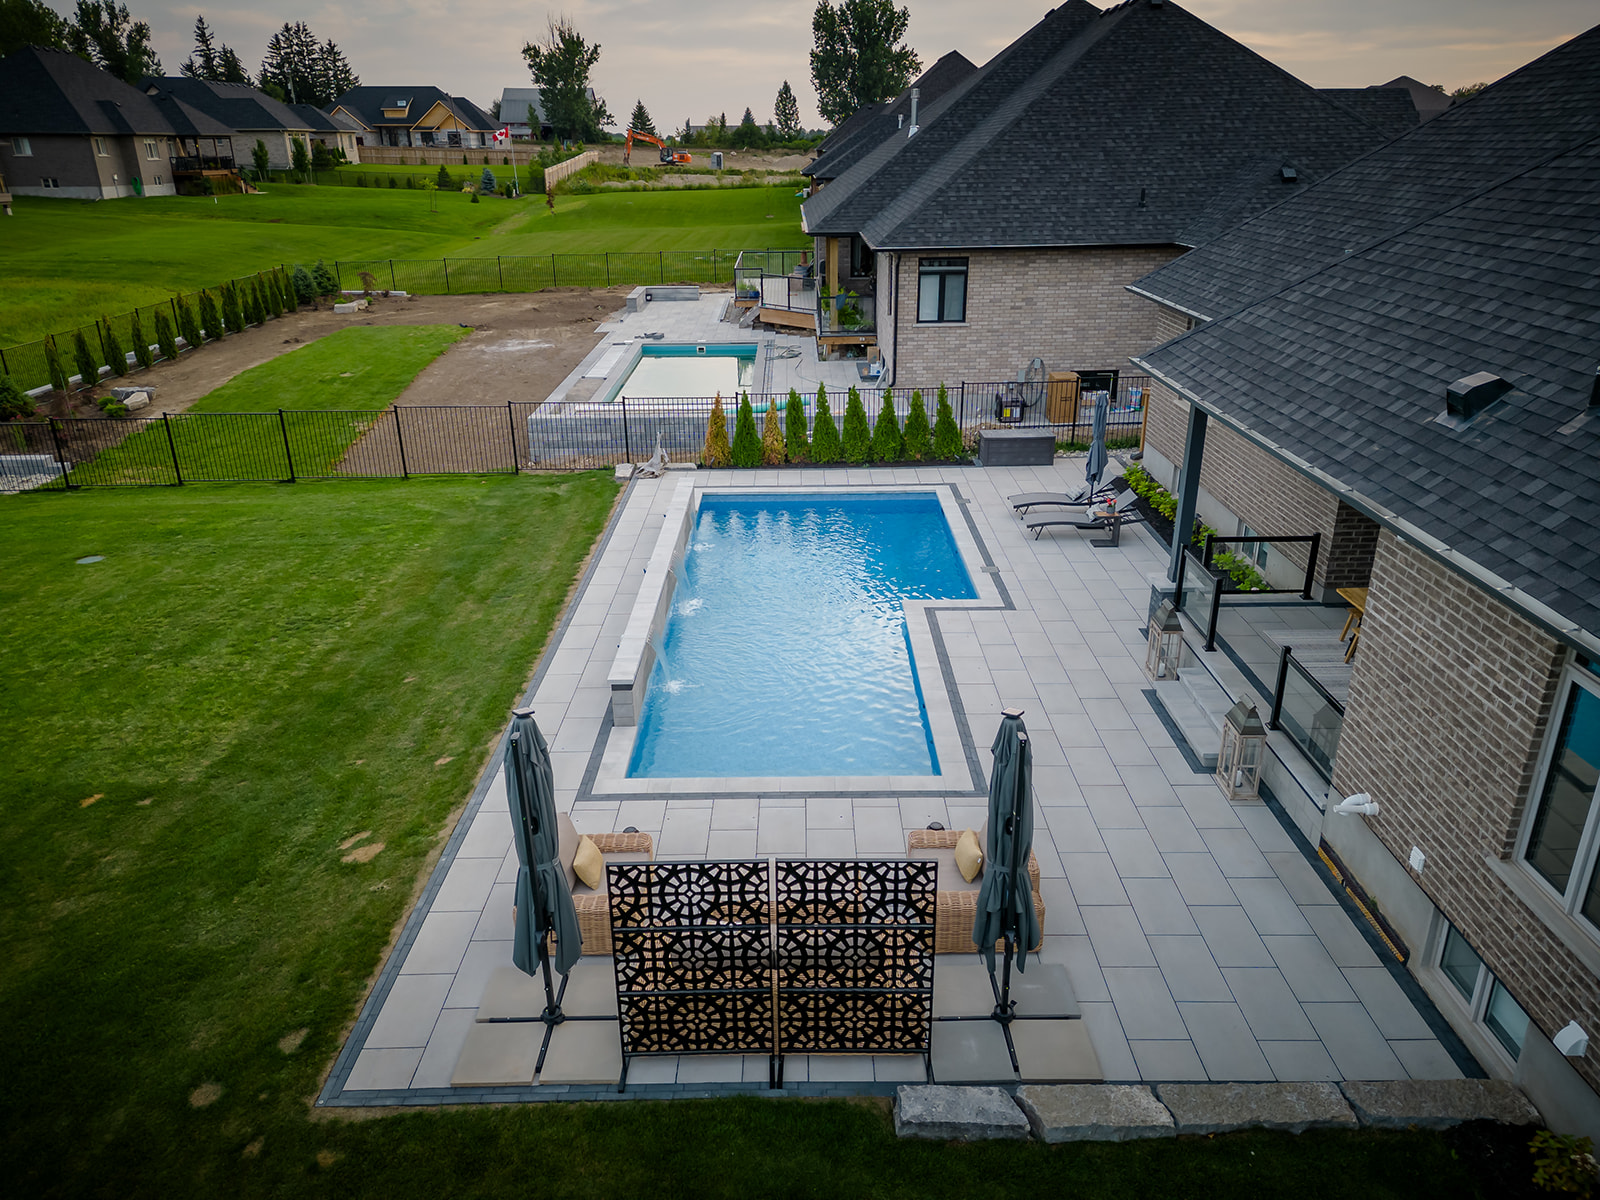 An inground pool with seating area toward the front, stairs going into the house on the right and lounge chairs.